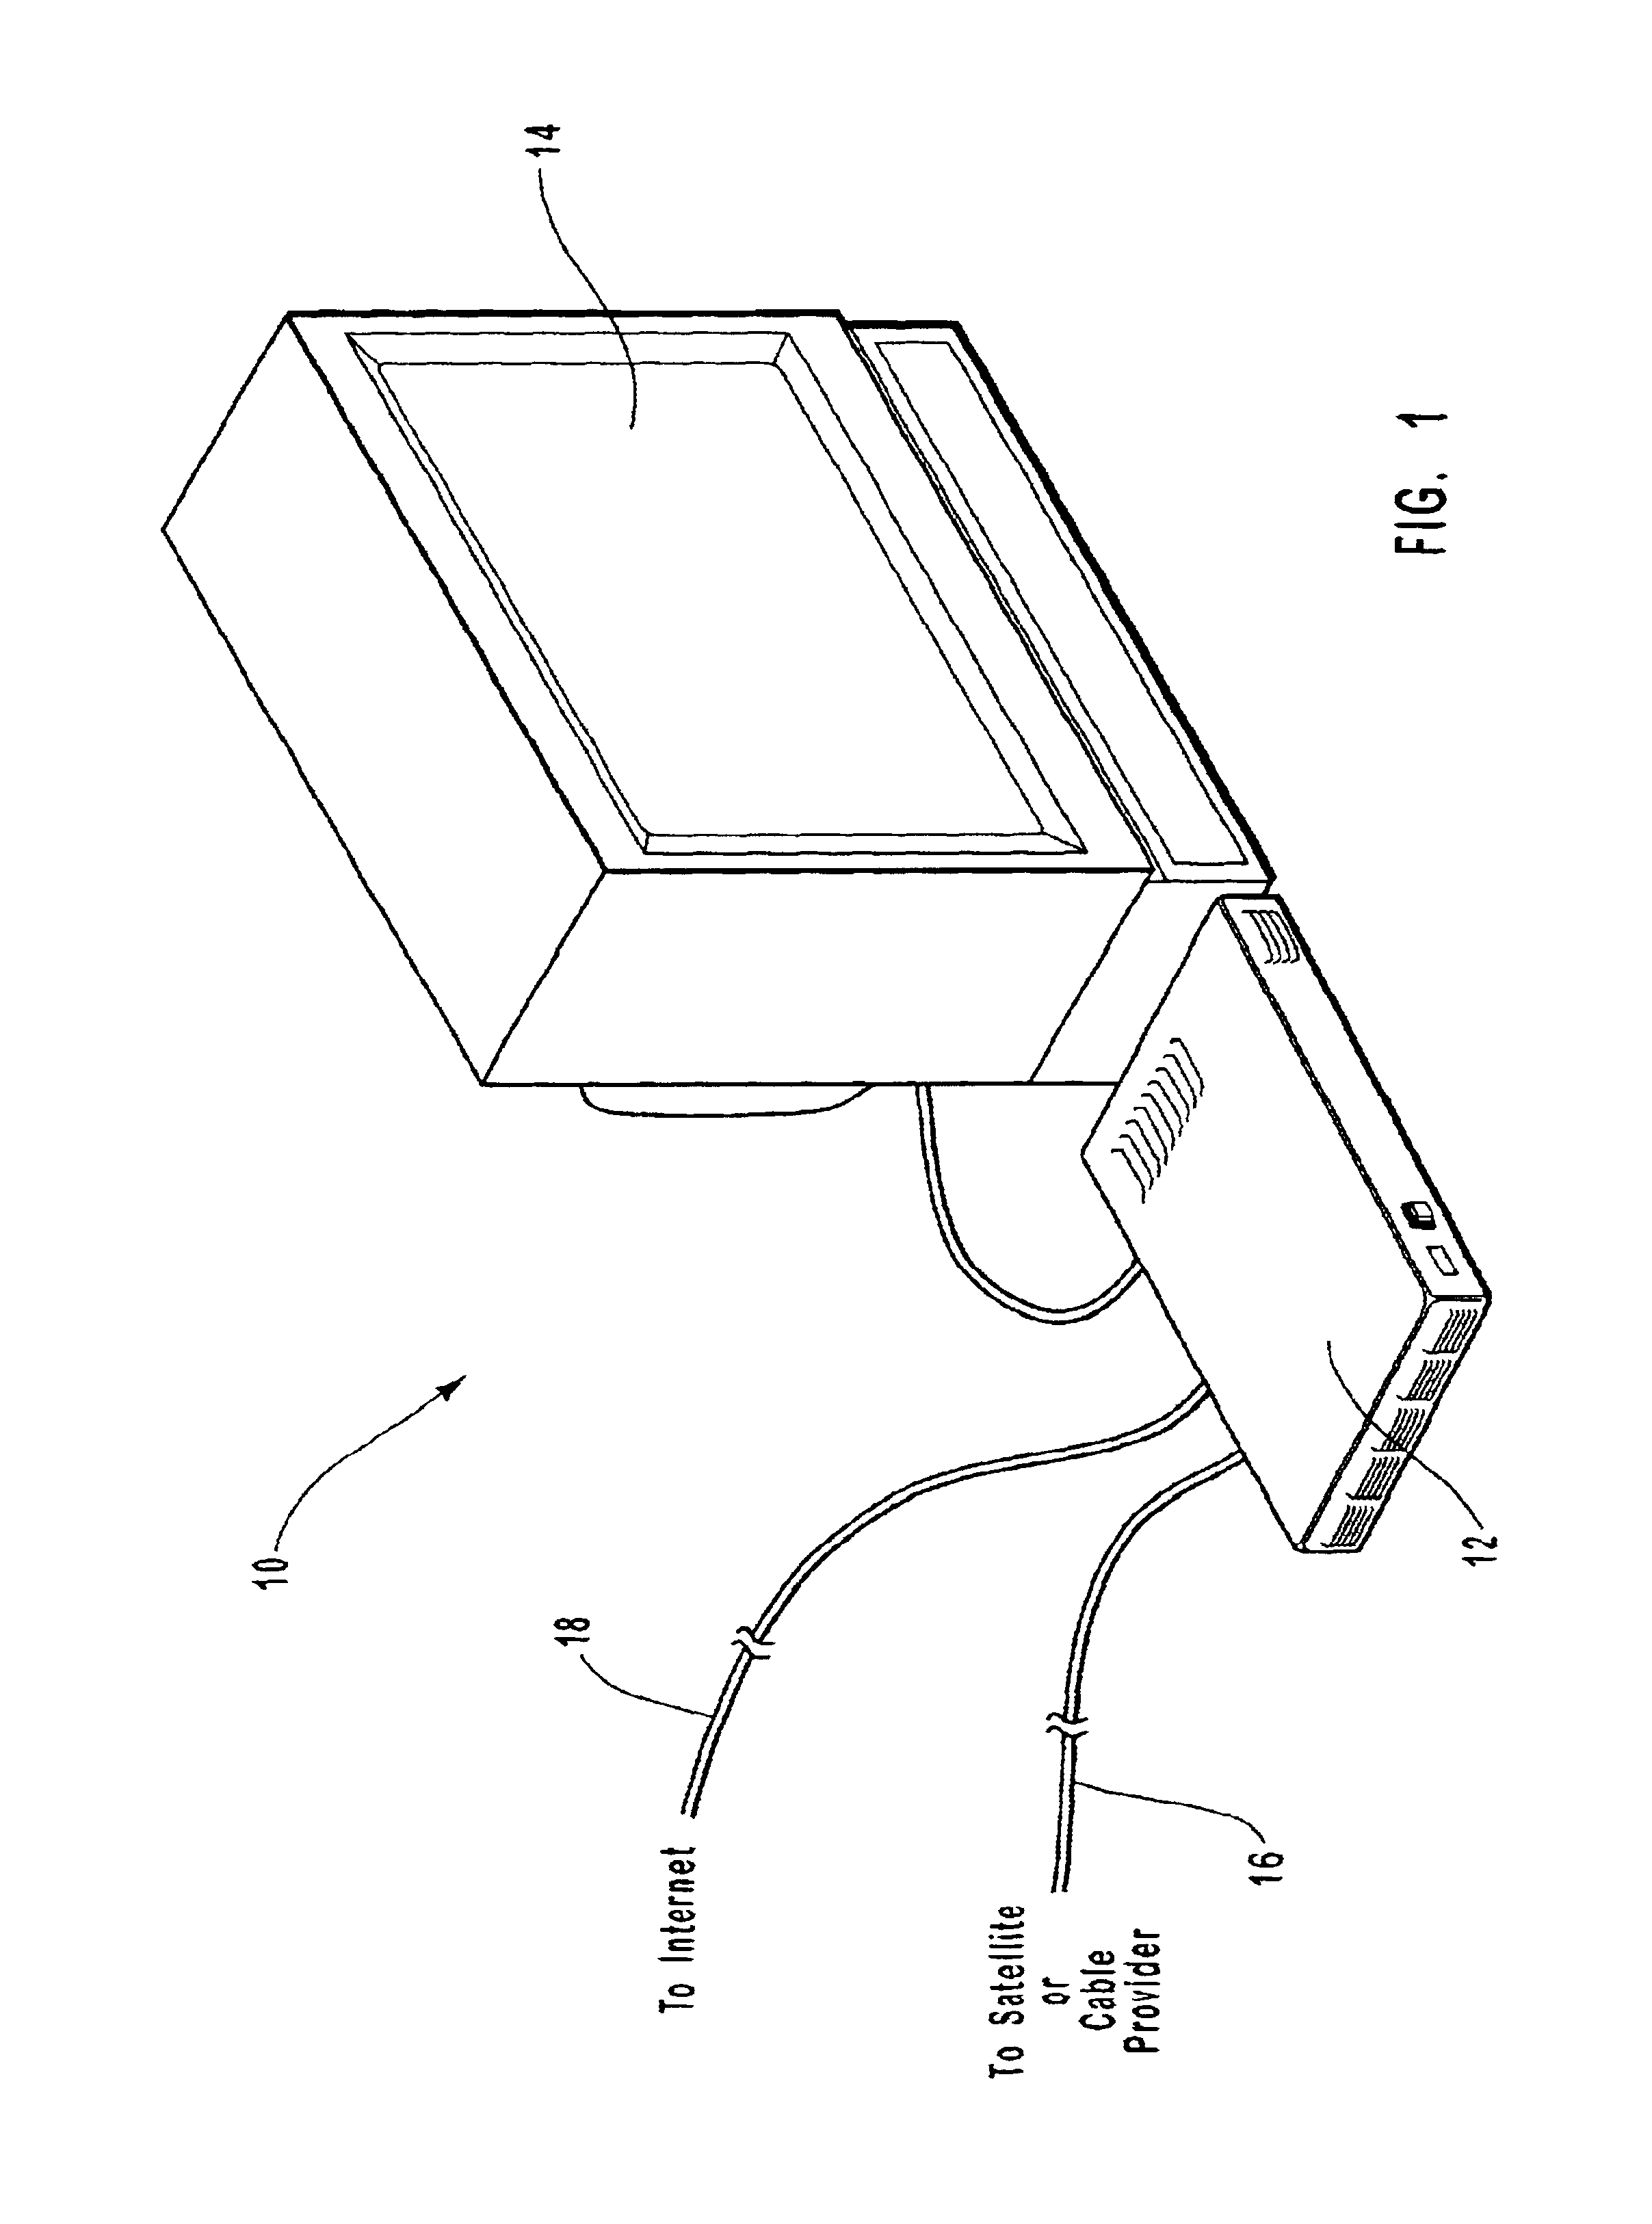 Controlling thermal, acoustic, and/or electromagnetic properties of a computing device